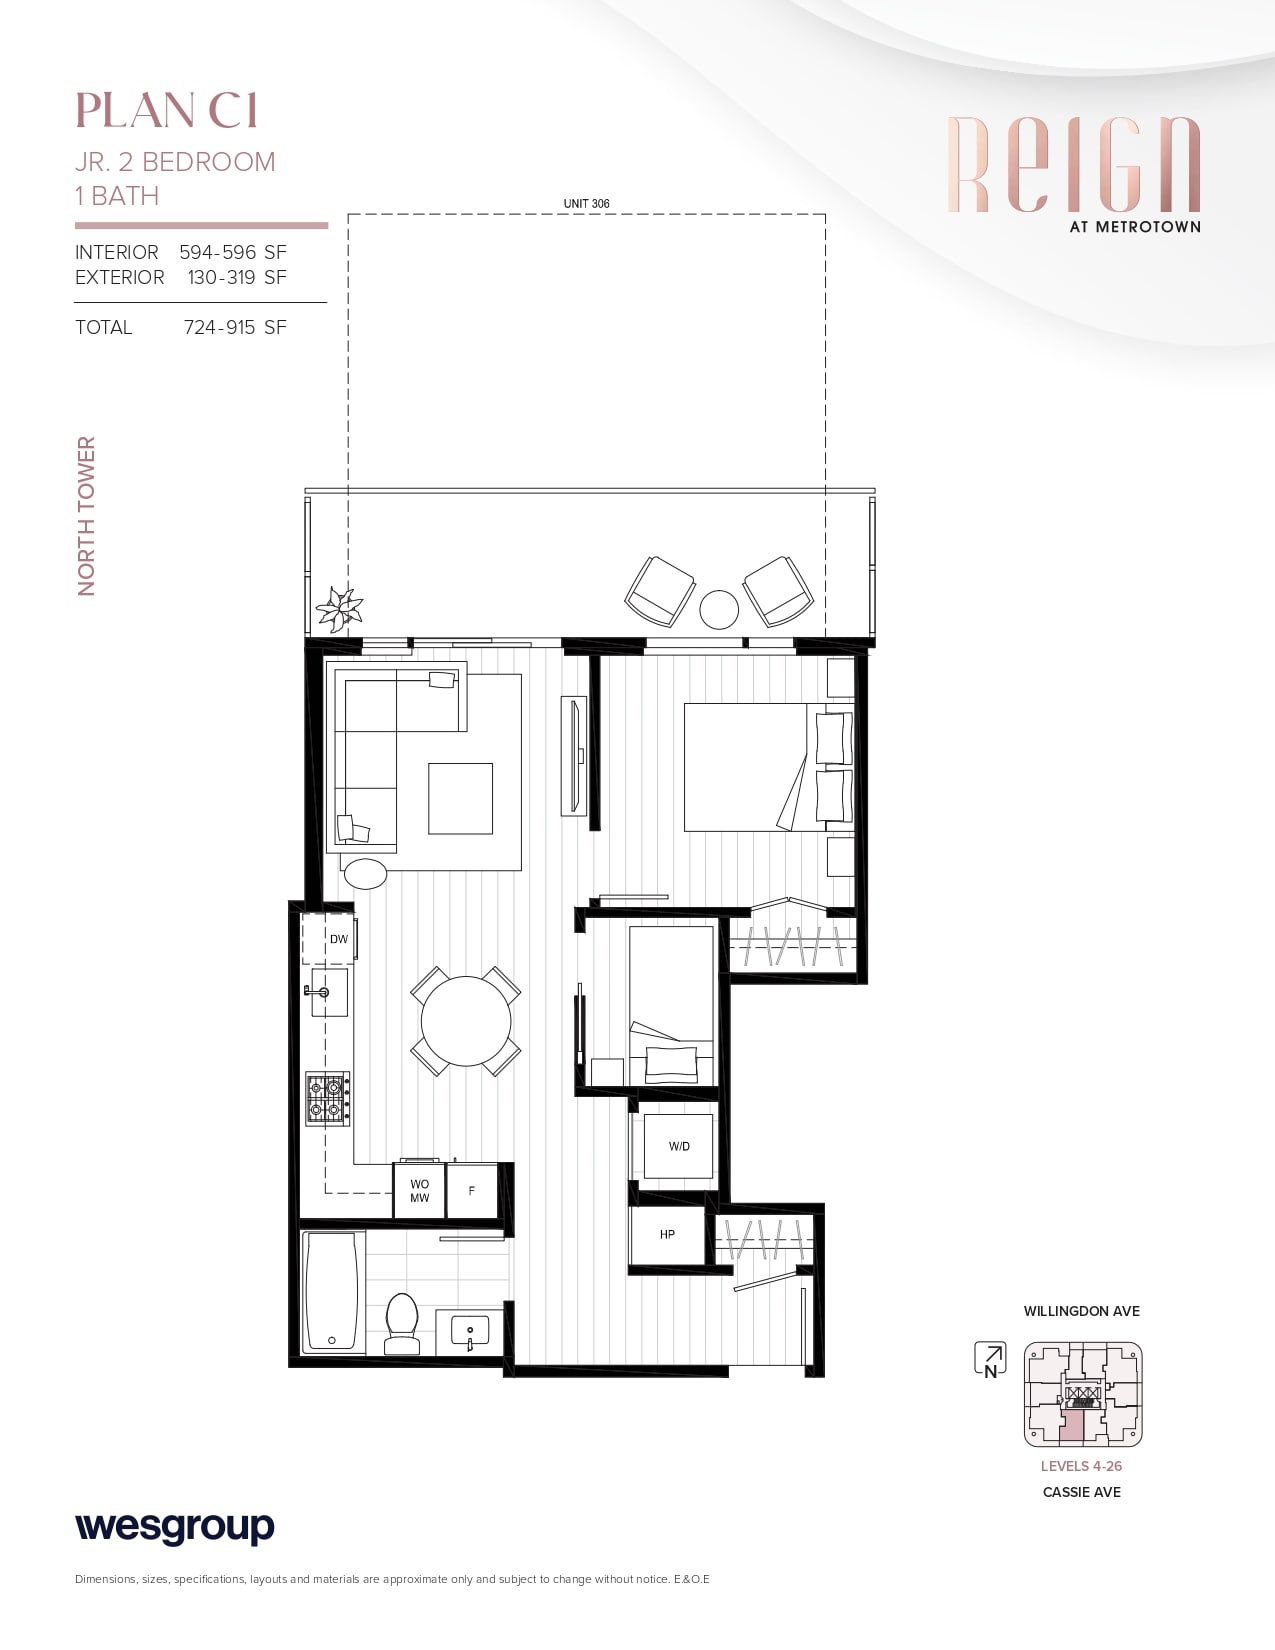 Reign_-_North_Tower_-_Typical_Floorplans_-_FINAL__page-0008-min.jpg